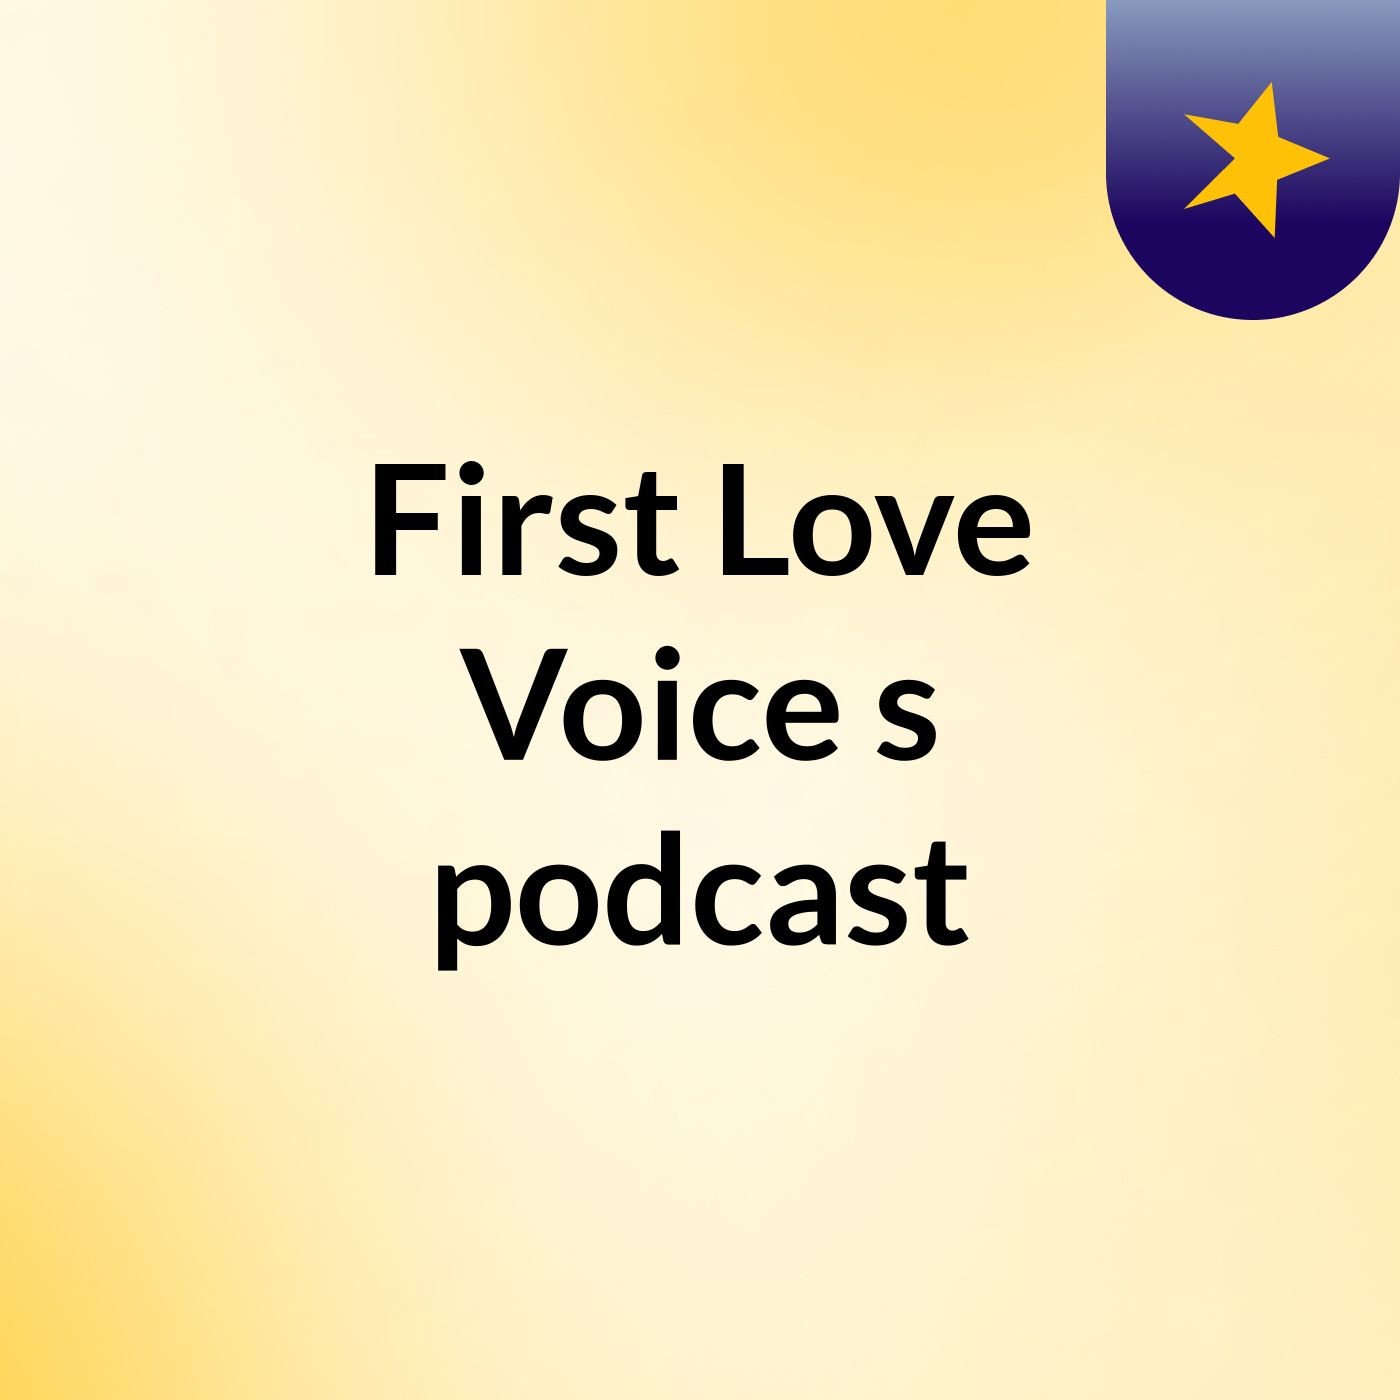 Episode 2 - First Love Voice's podcast